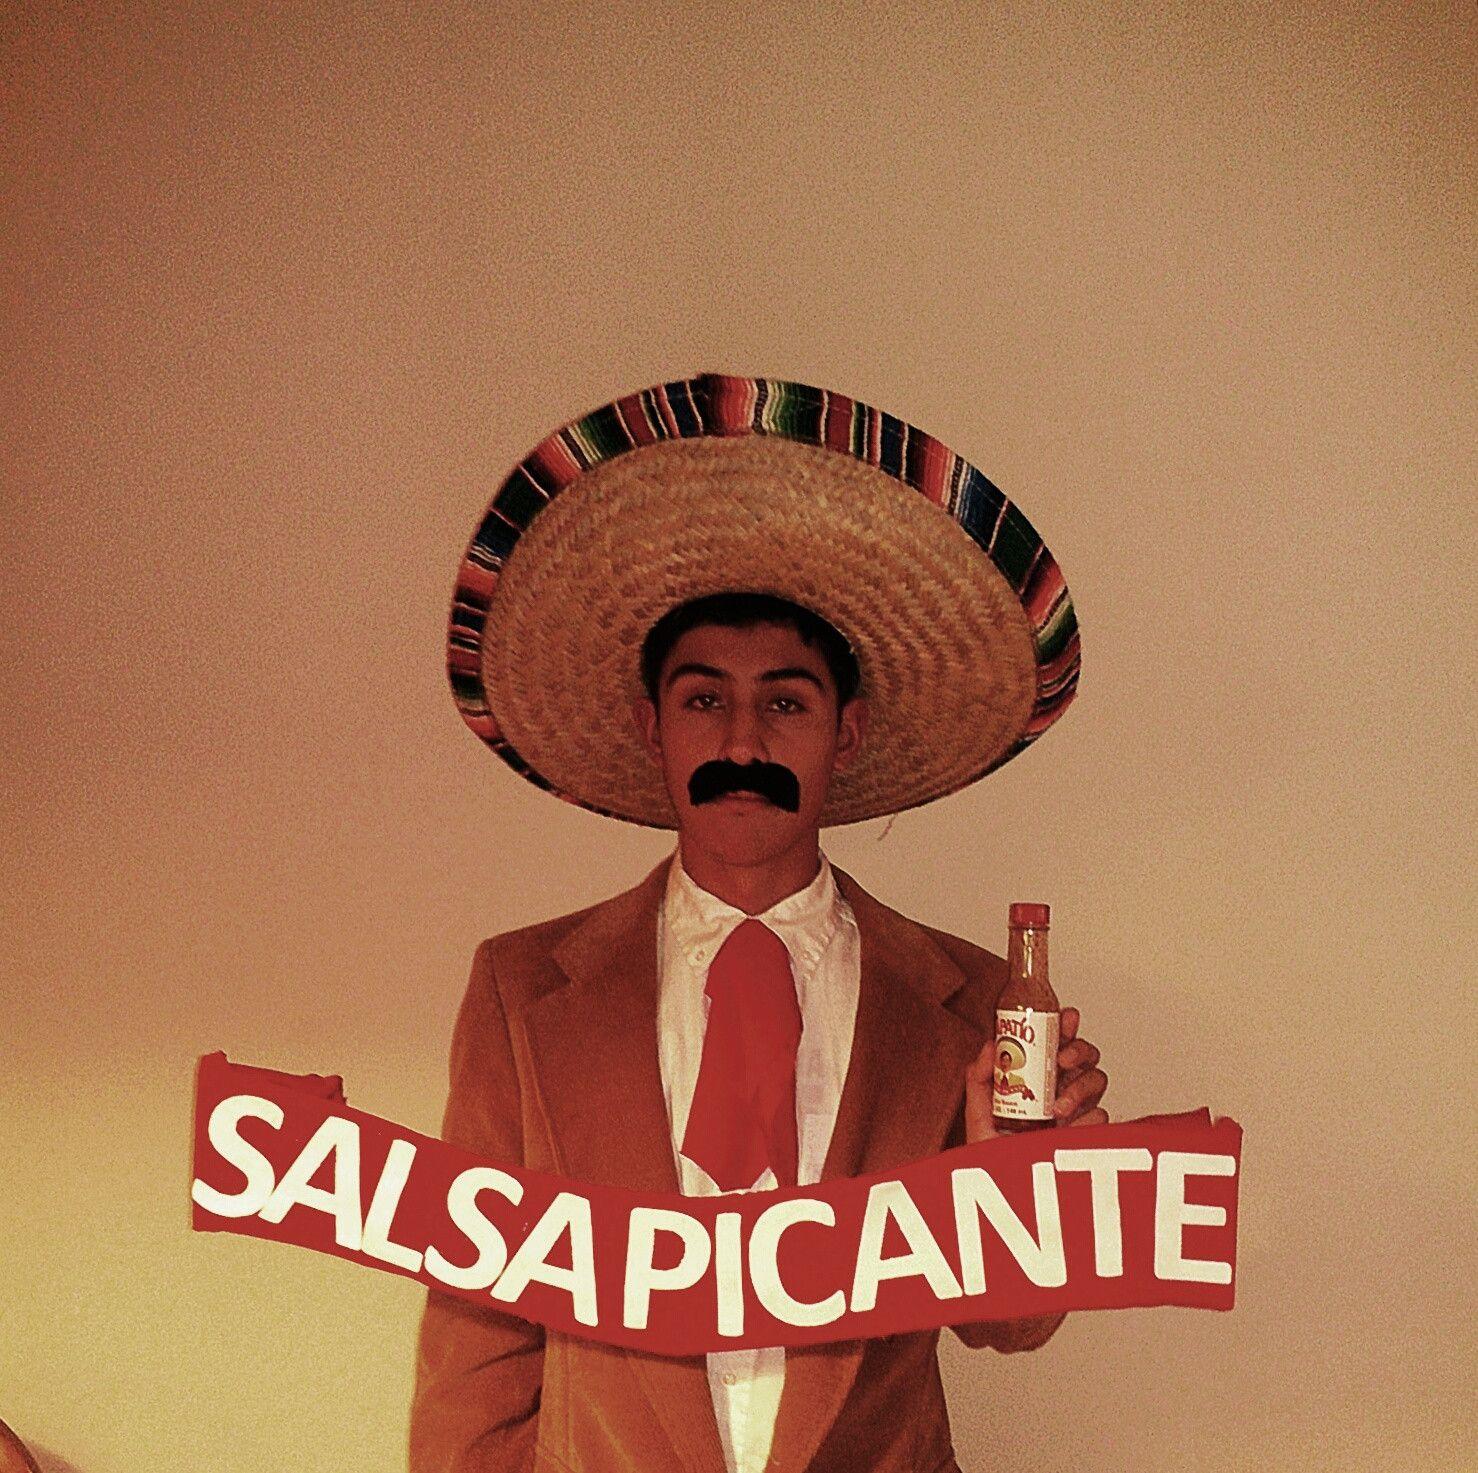 Tapatio Logo - I was the Tapatio guy for Halloween : pics